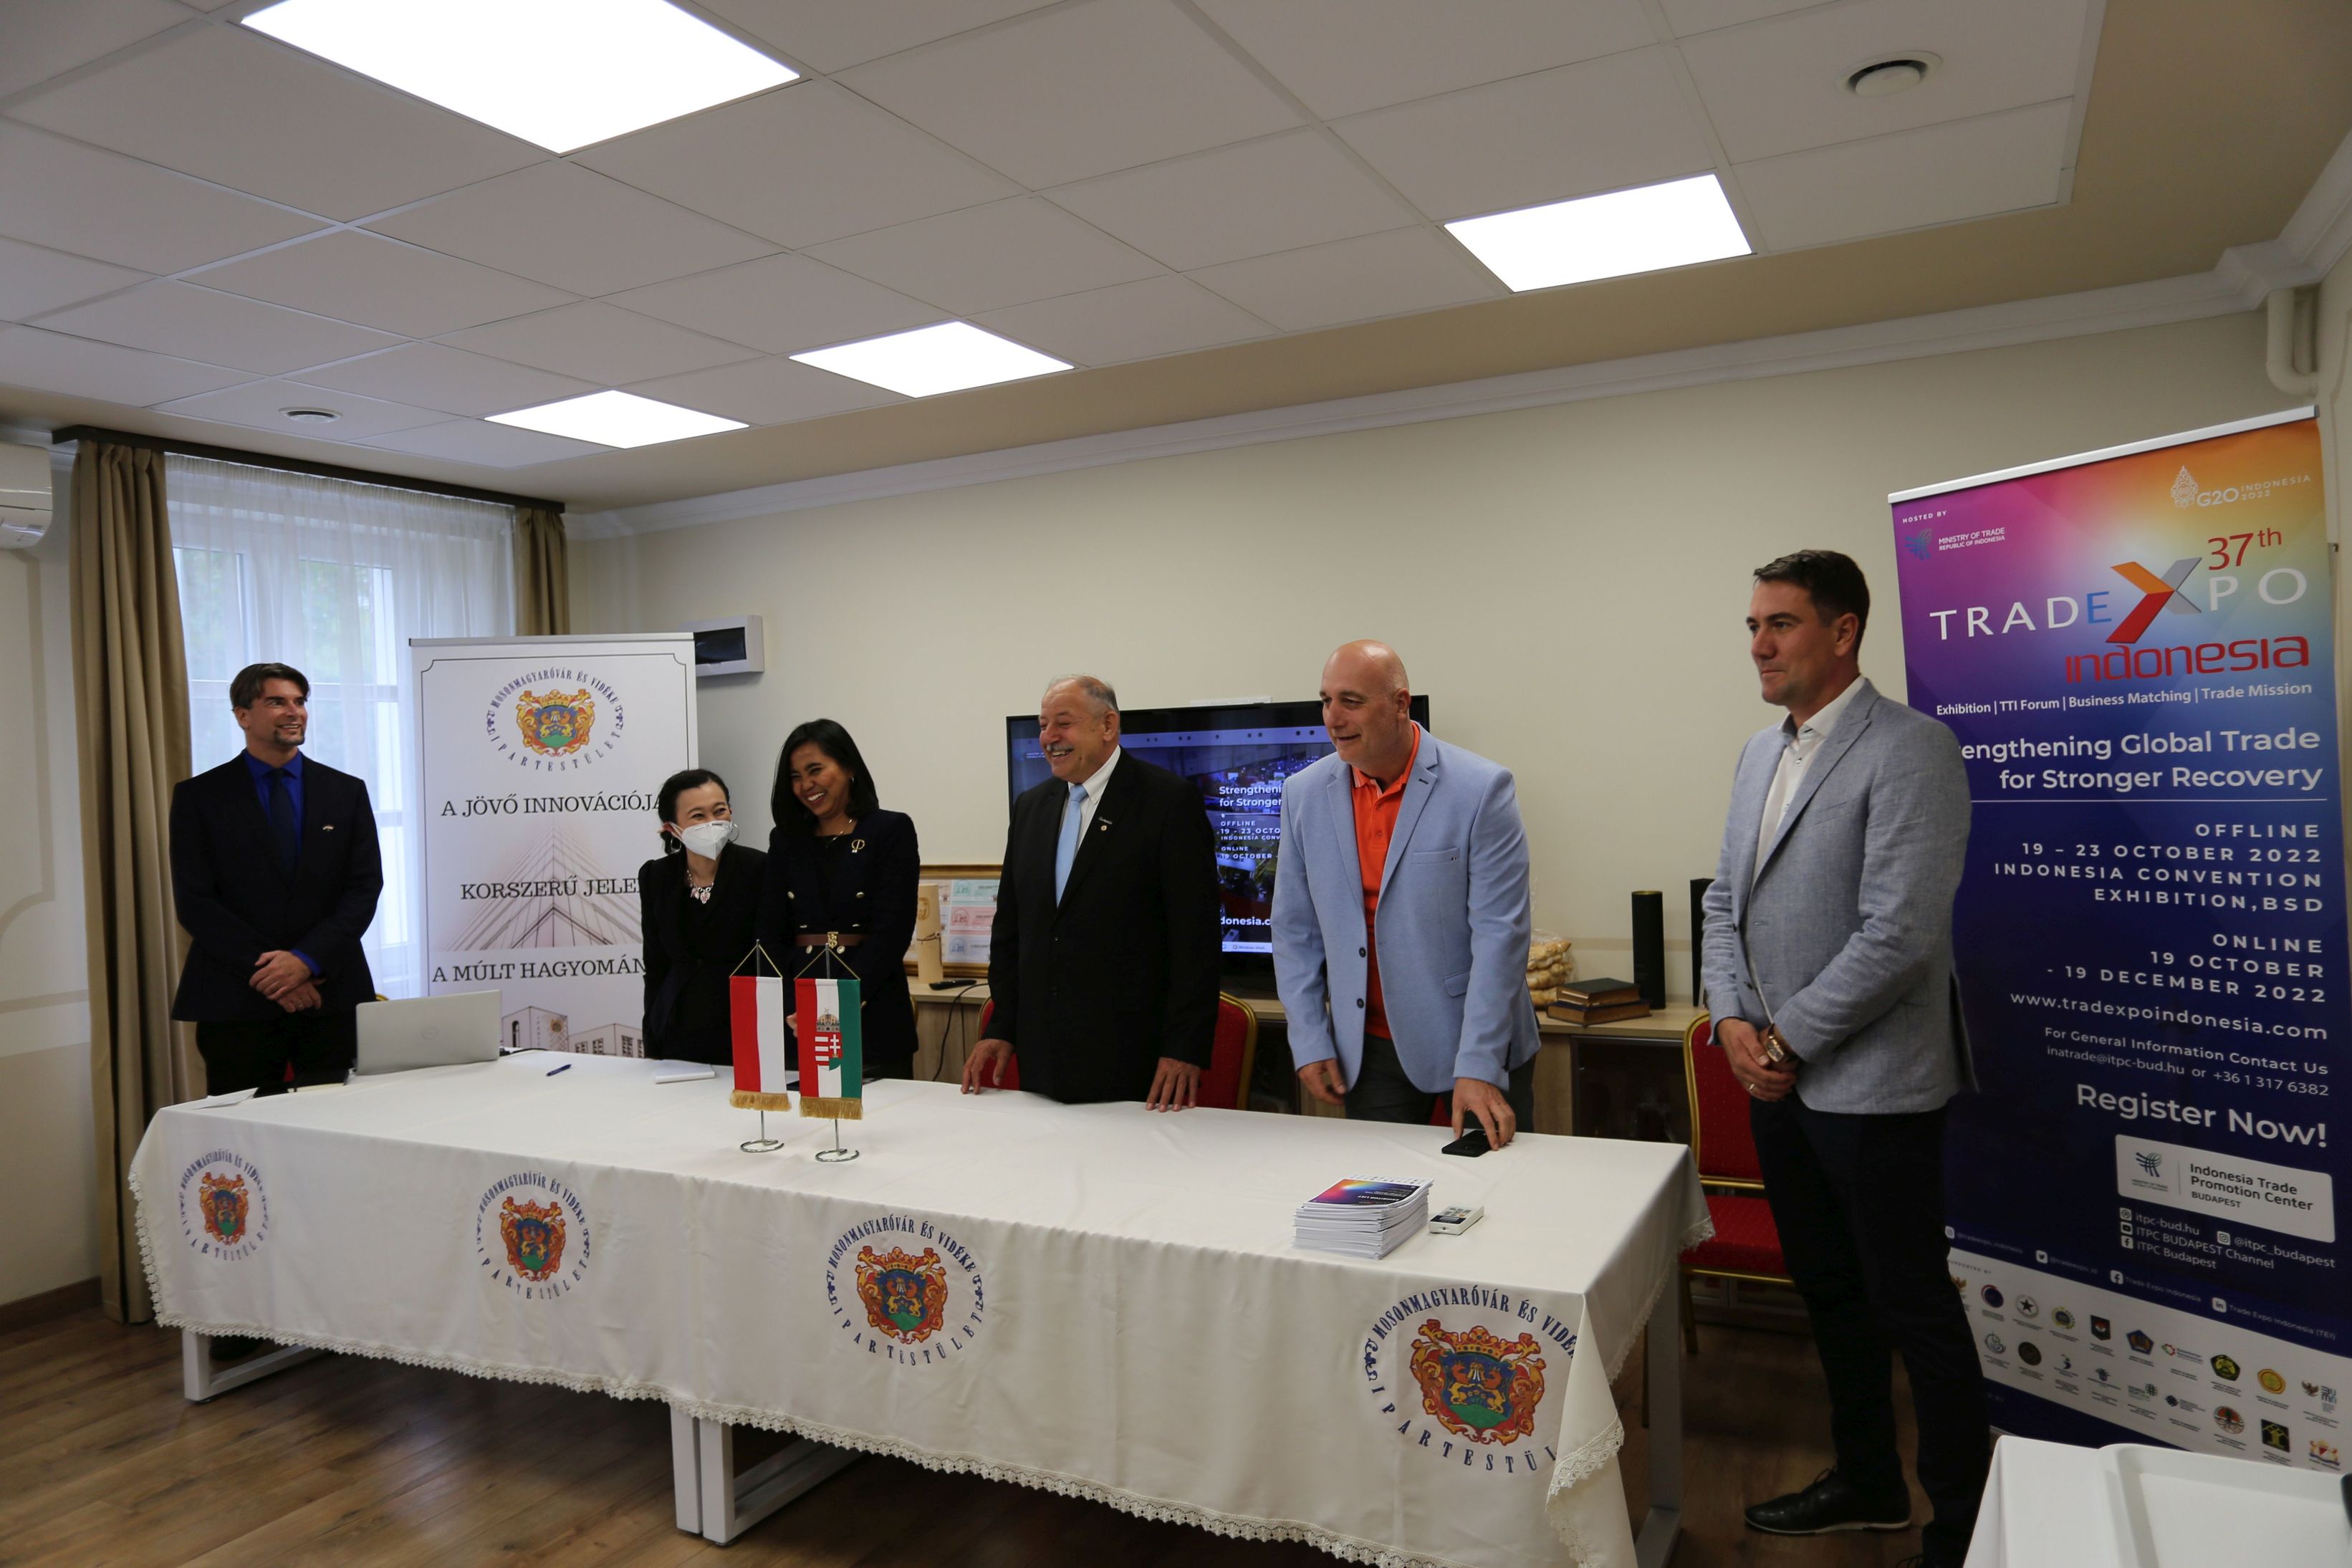 Dissemination of Trade Expo Indonesia 2022 at the Industry Association in Mosonmagyaróvár